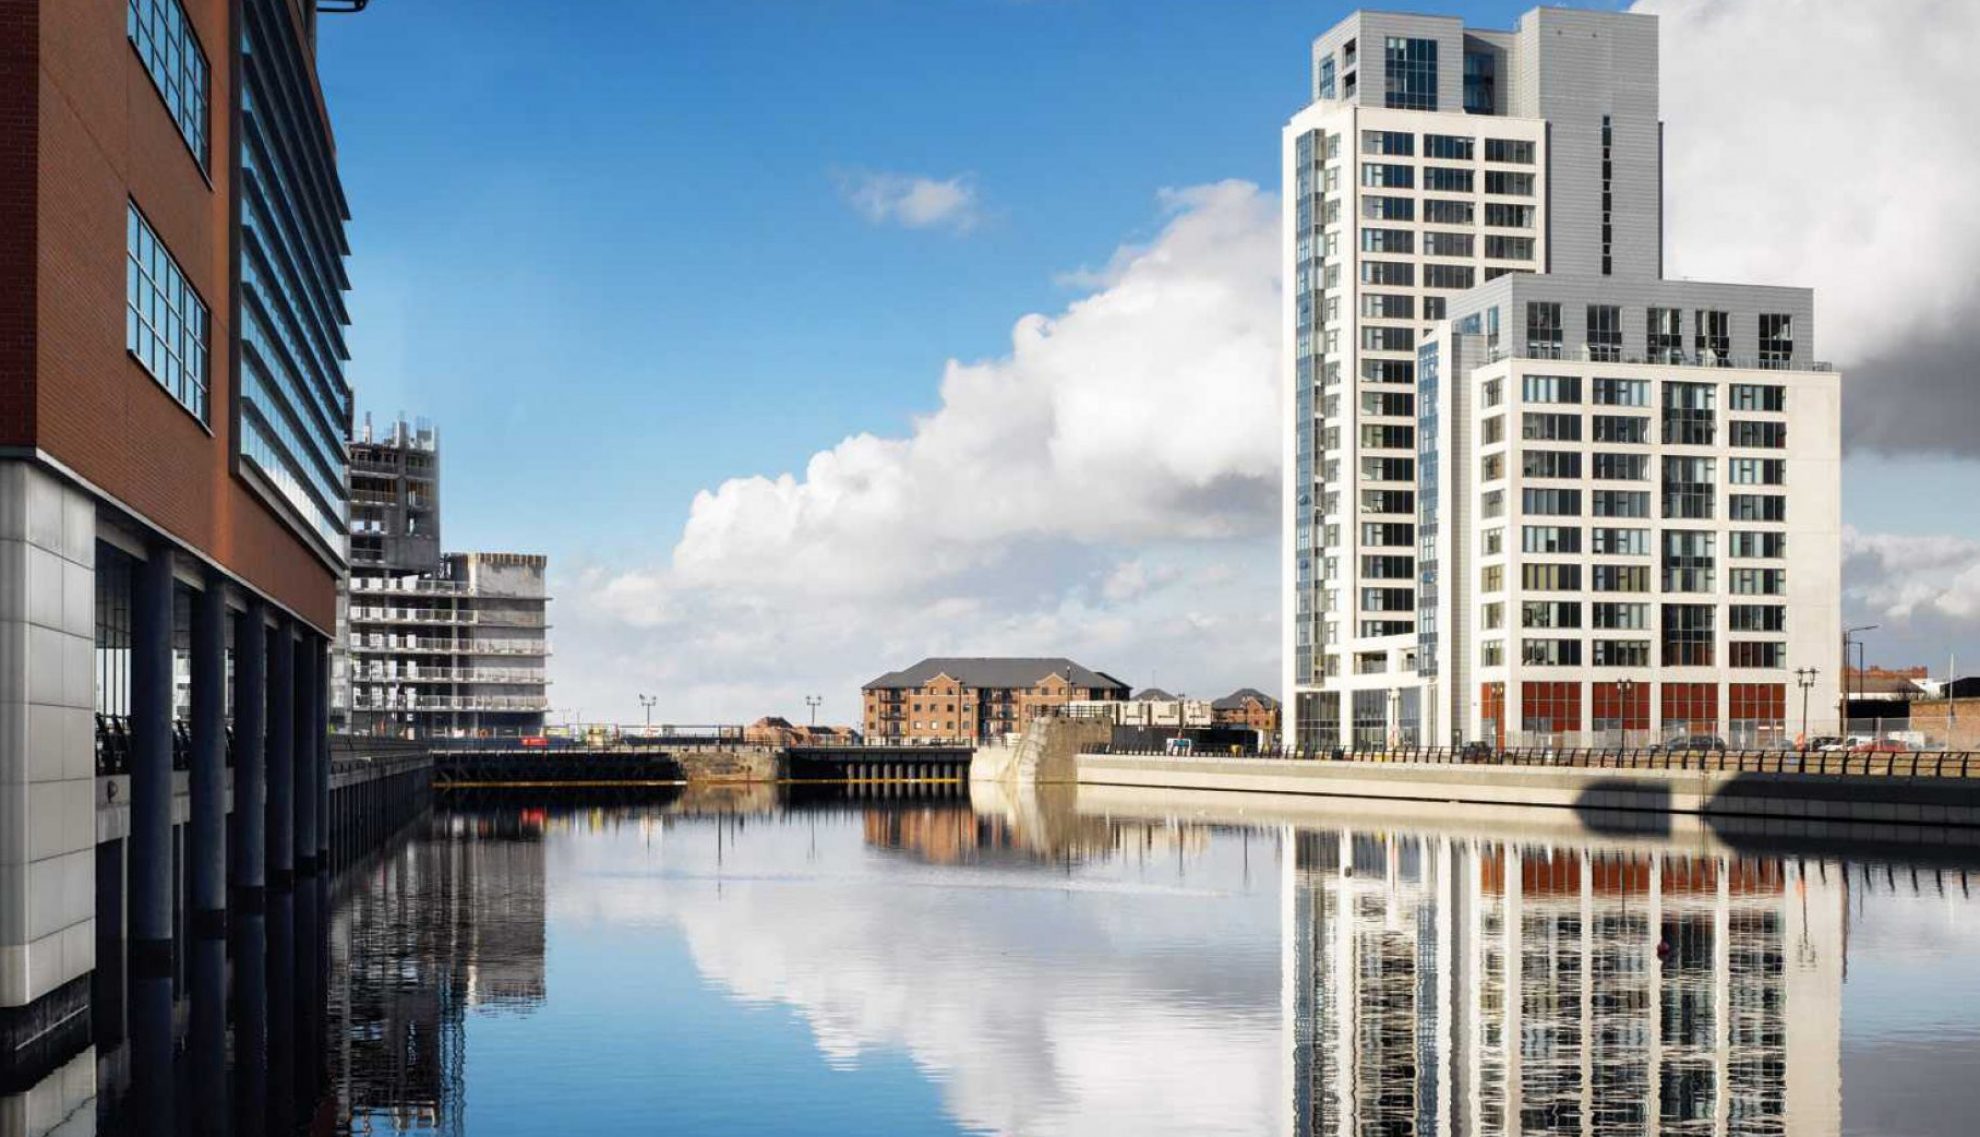 No.1 Princes Dock – one of our best new homes developments in Merseyside